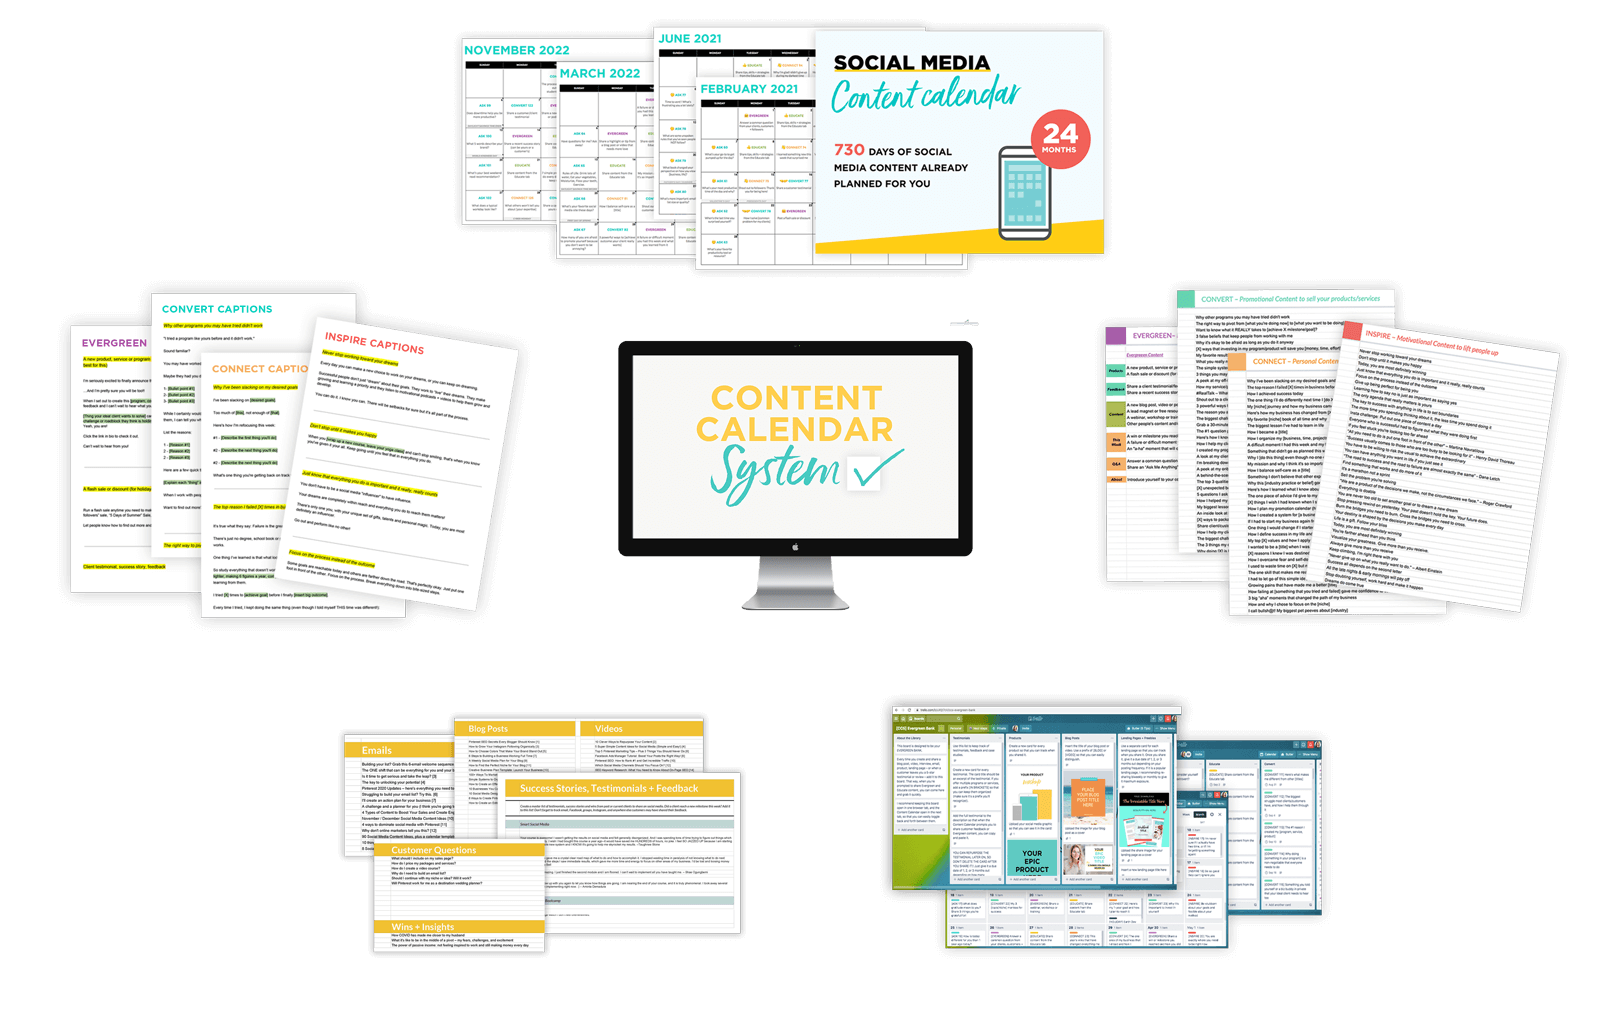 Content Calendar System by ConversionMinded